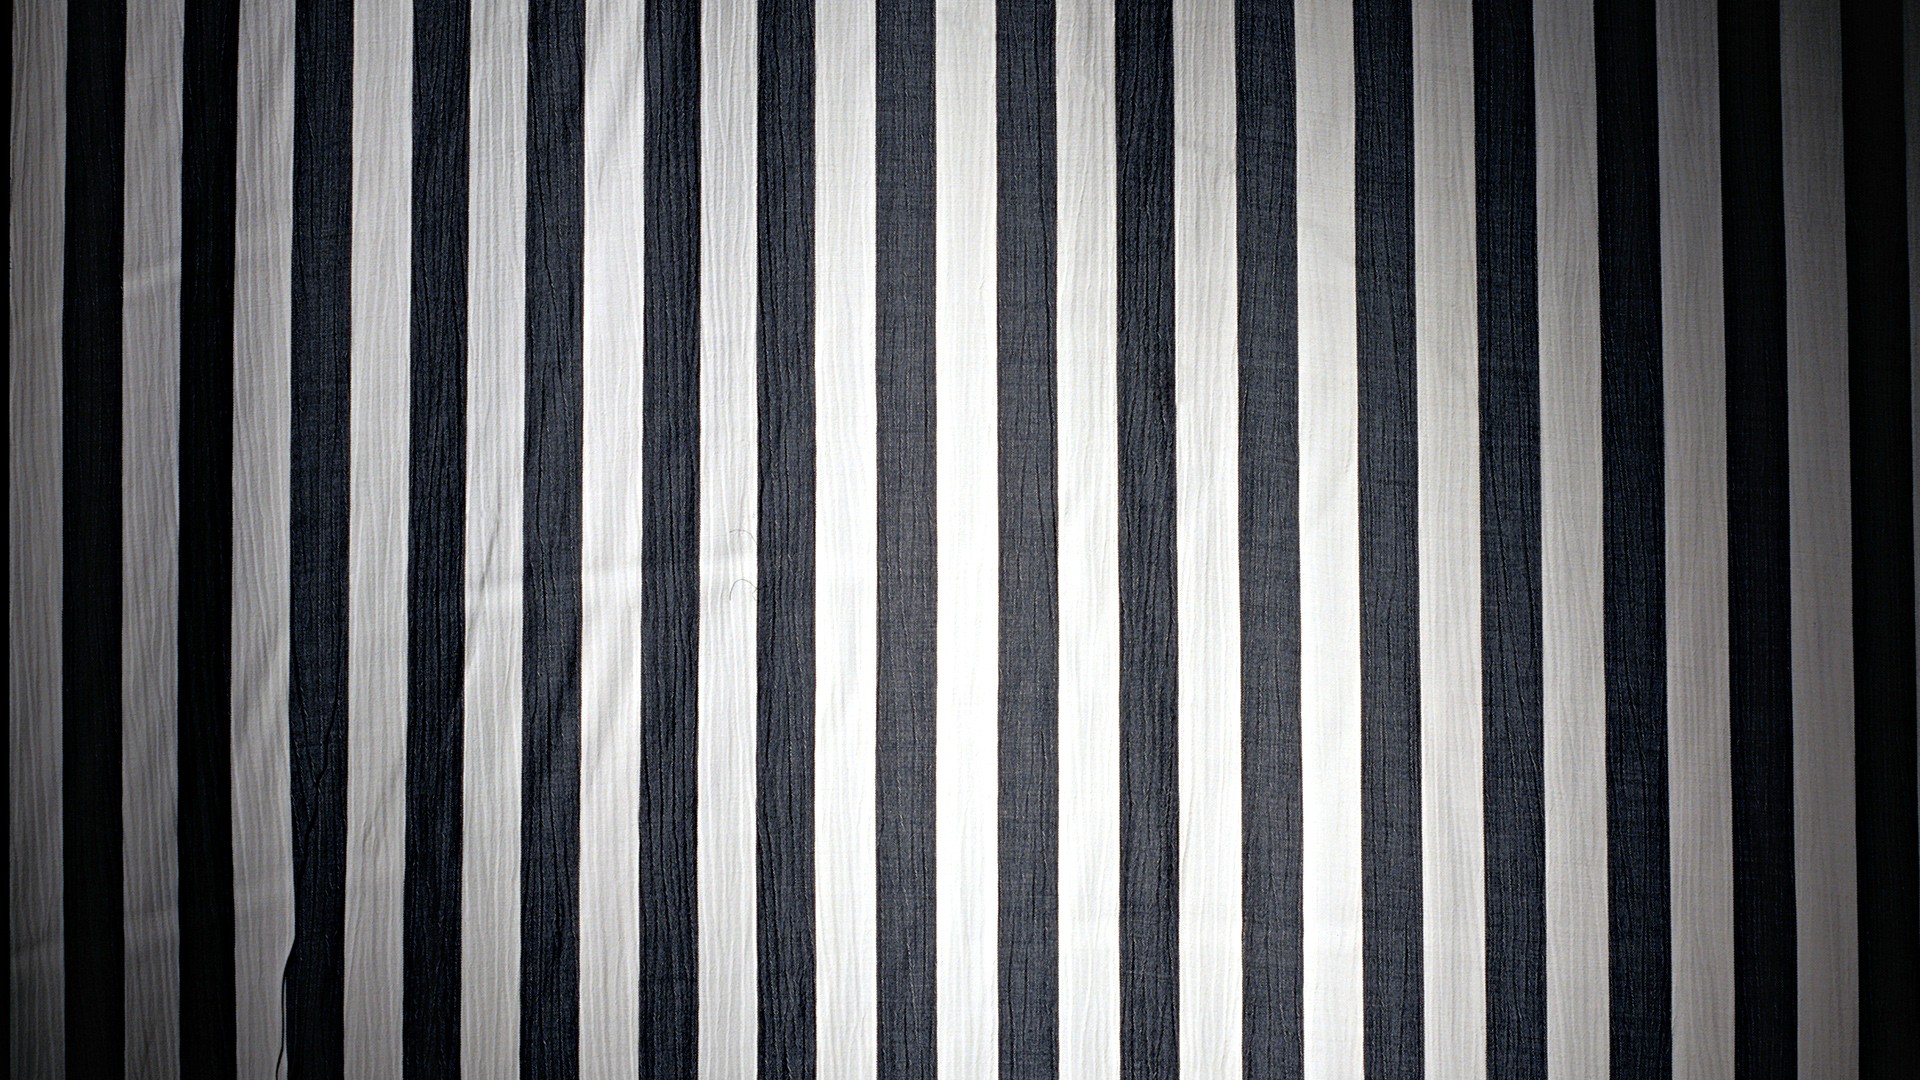 Free Download Striped Texture Wallpaper 896579 1920x1080 For Your